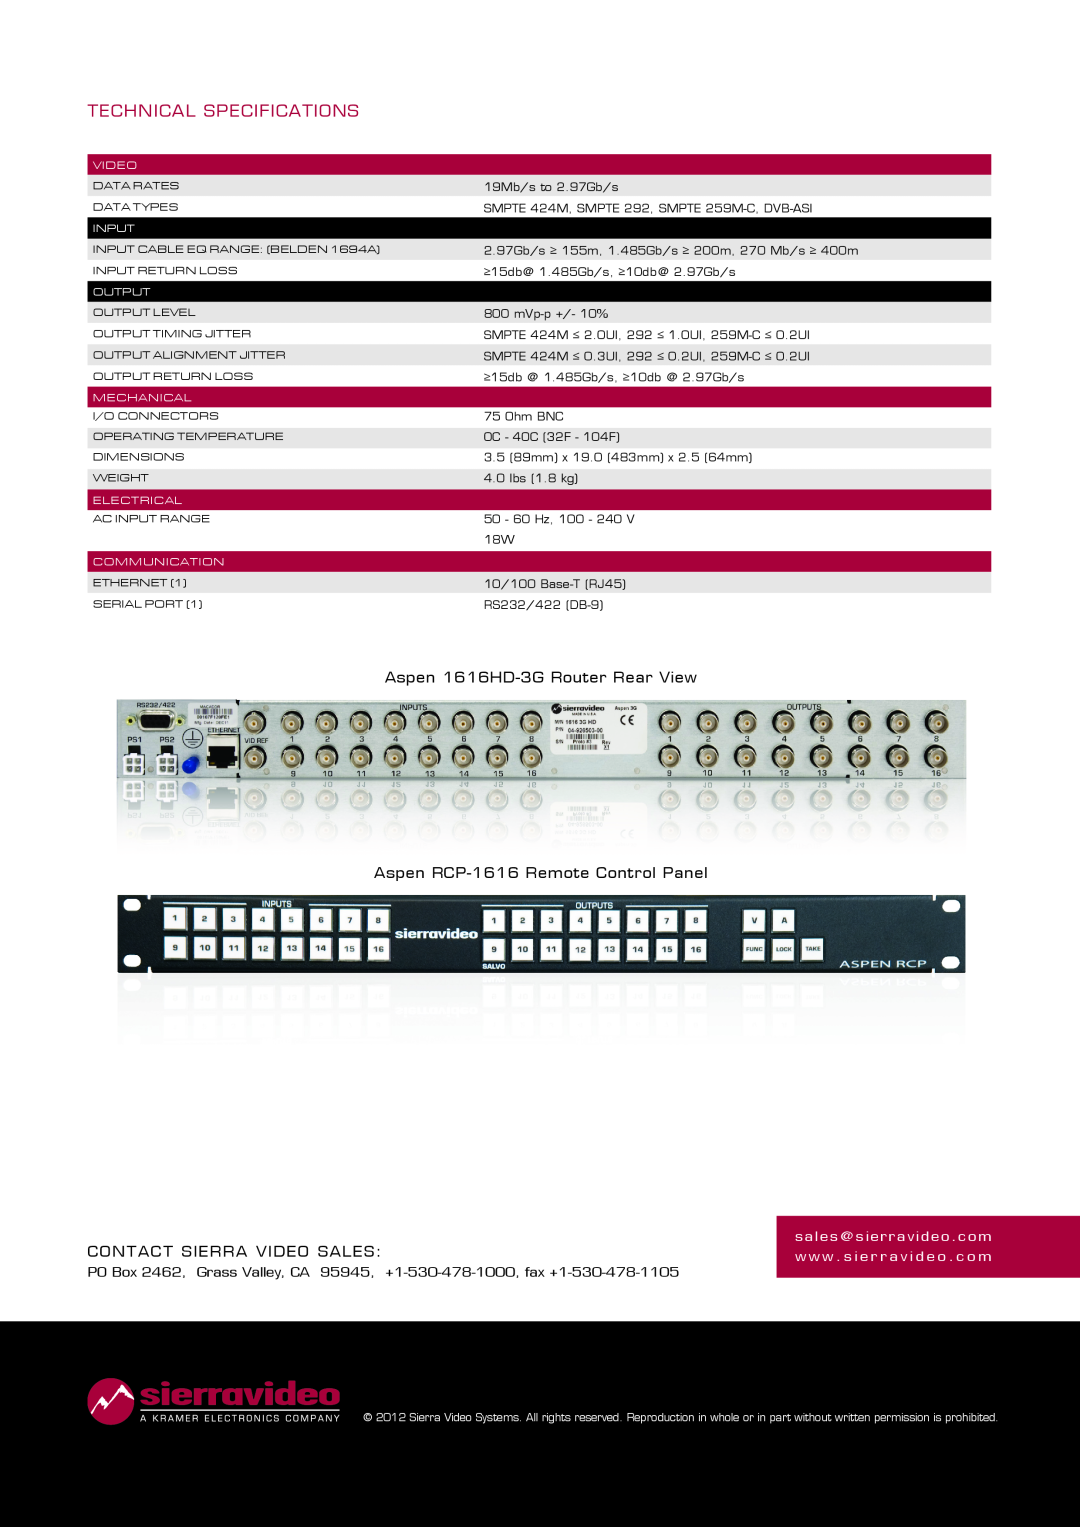 Sierra manual Technical Specifications, Aspen 1616HD-3G Router Rear View Aspen RCP-1616 Remote Control Panel 